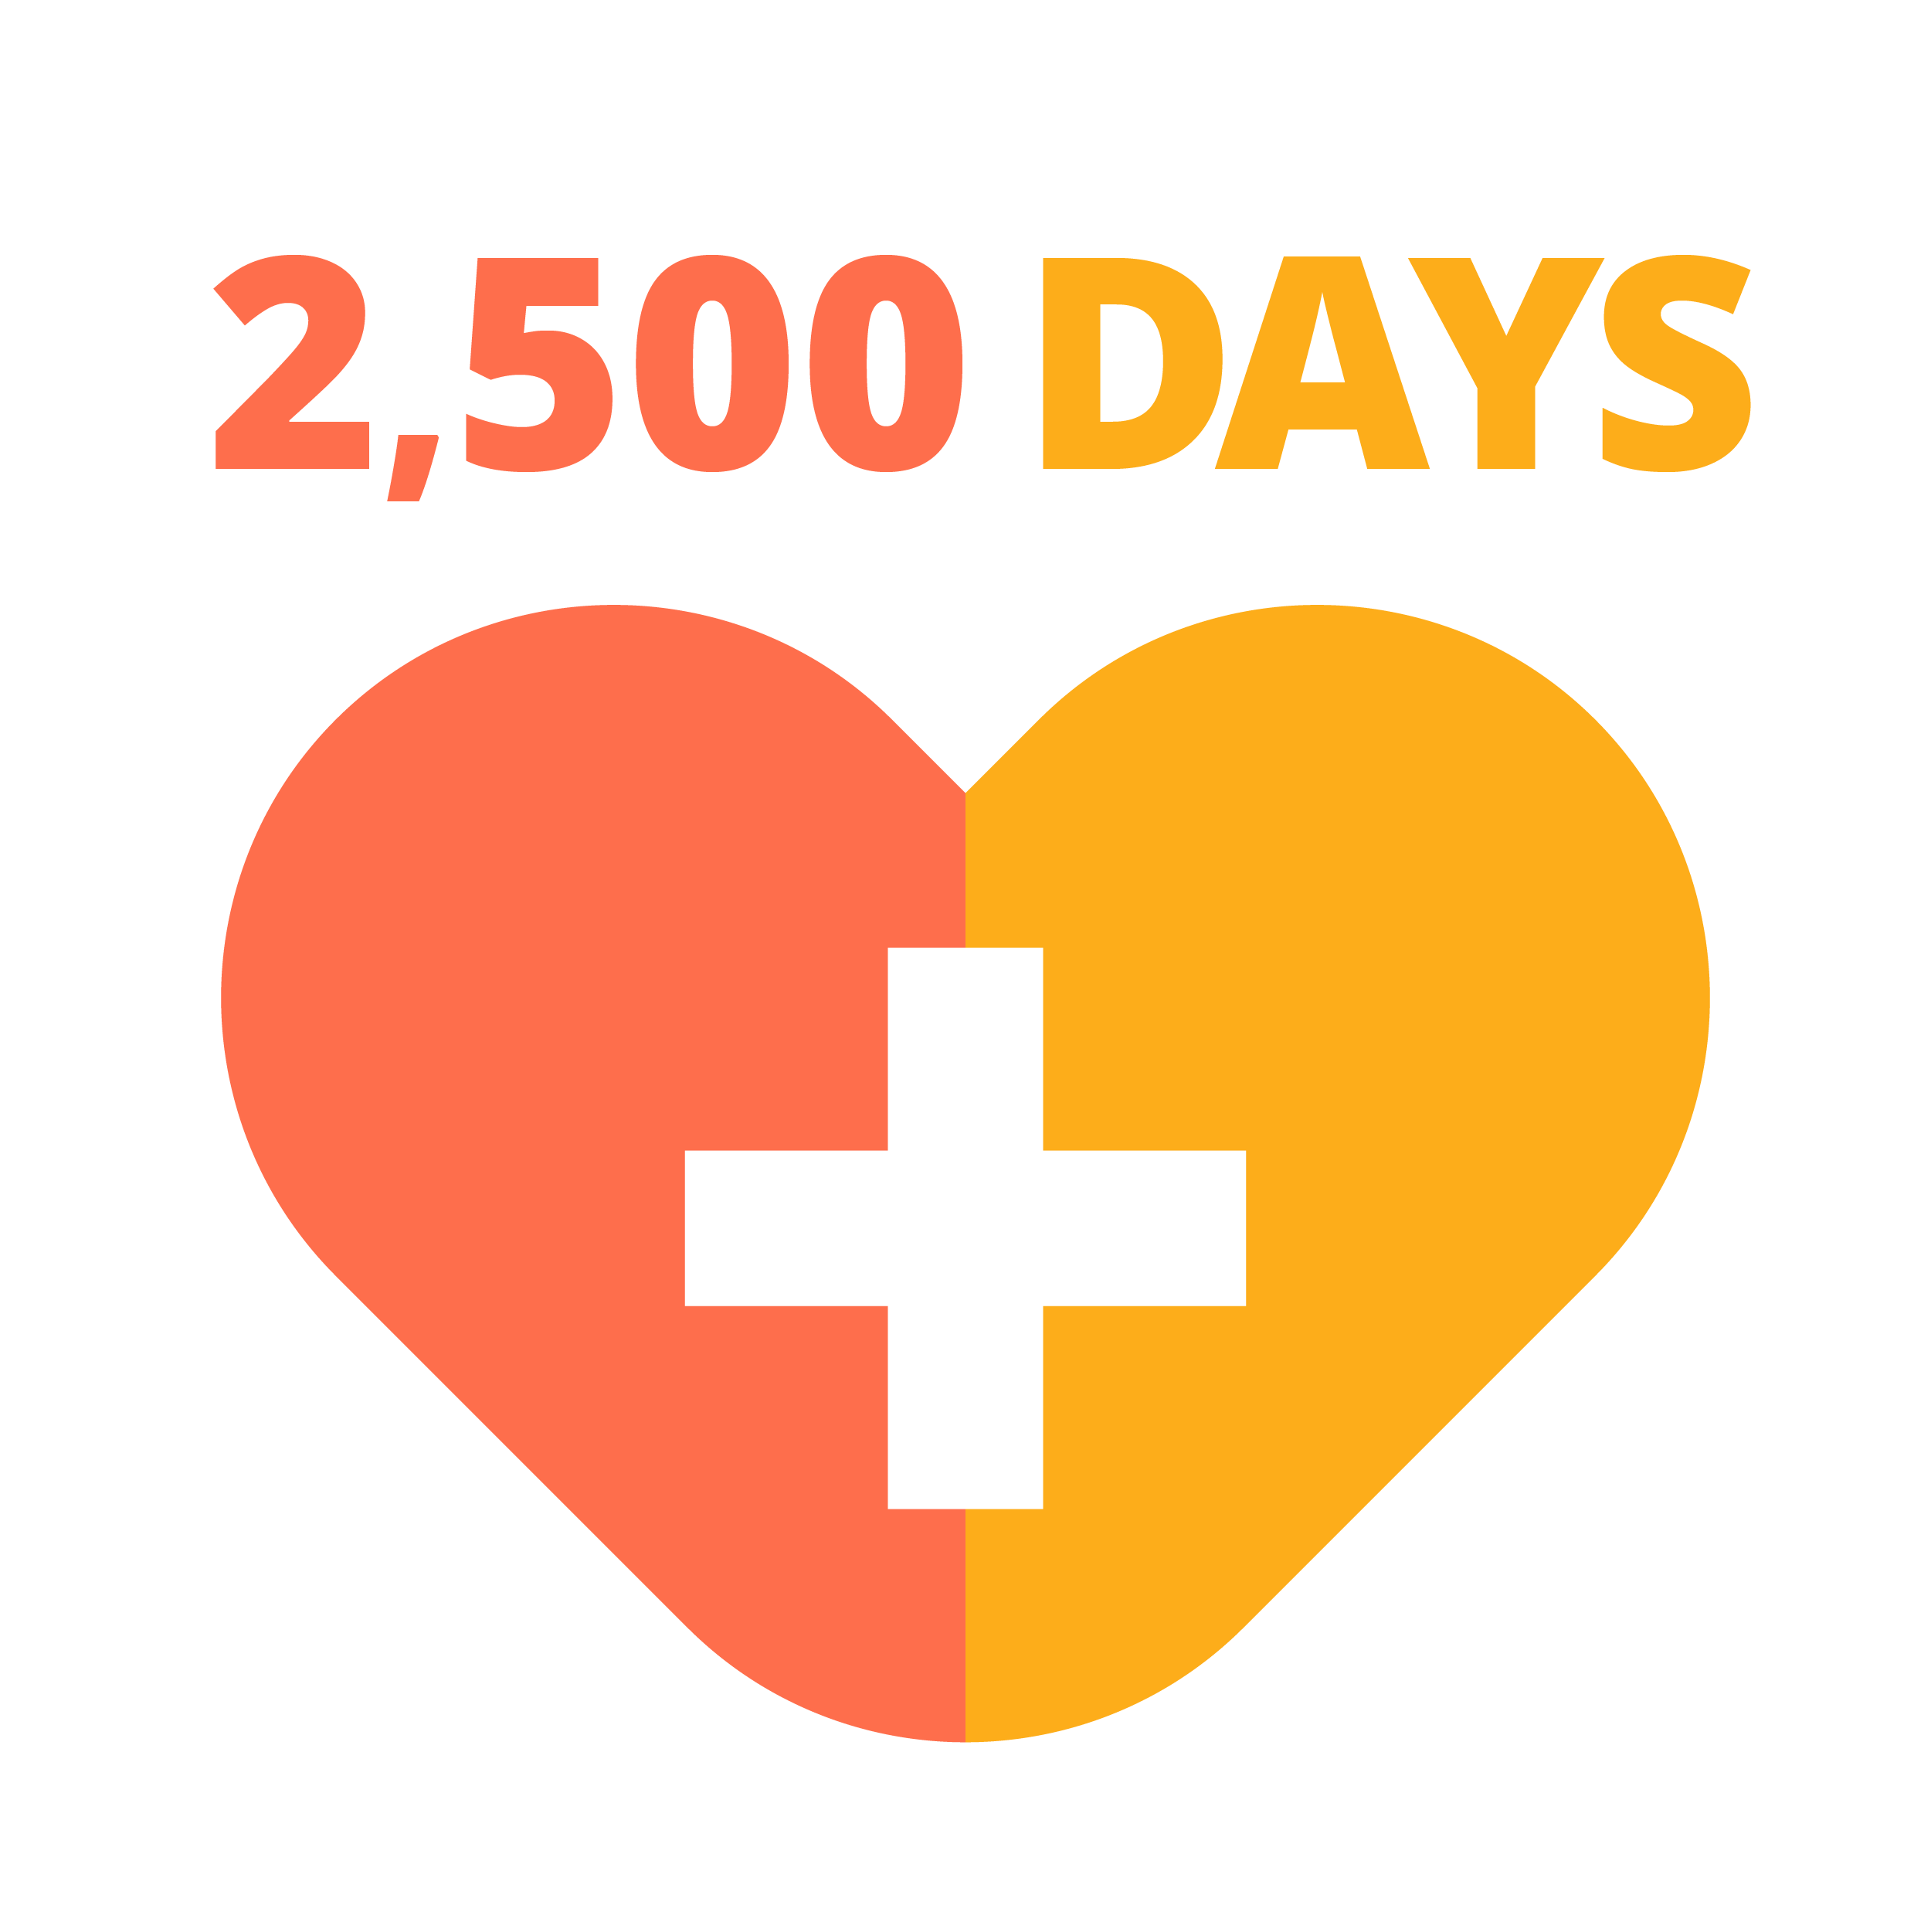 Heart with 2500 days